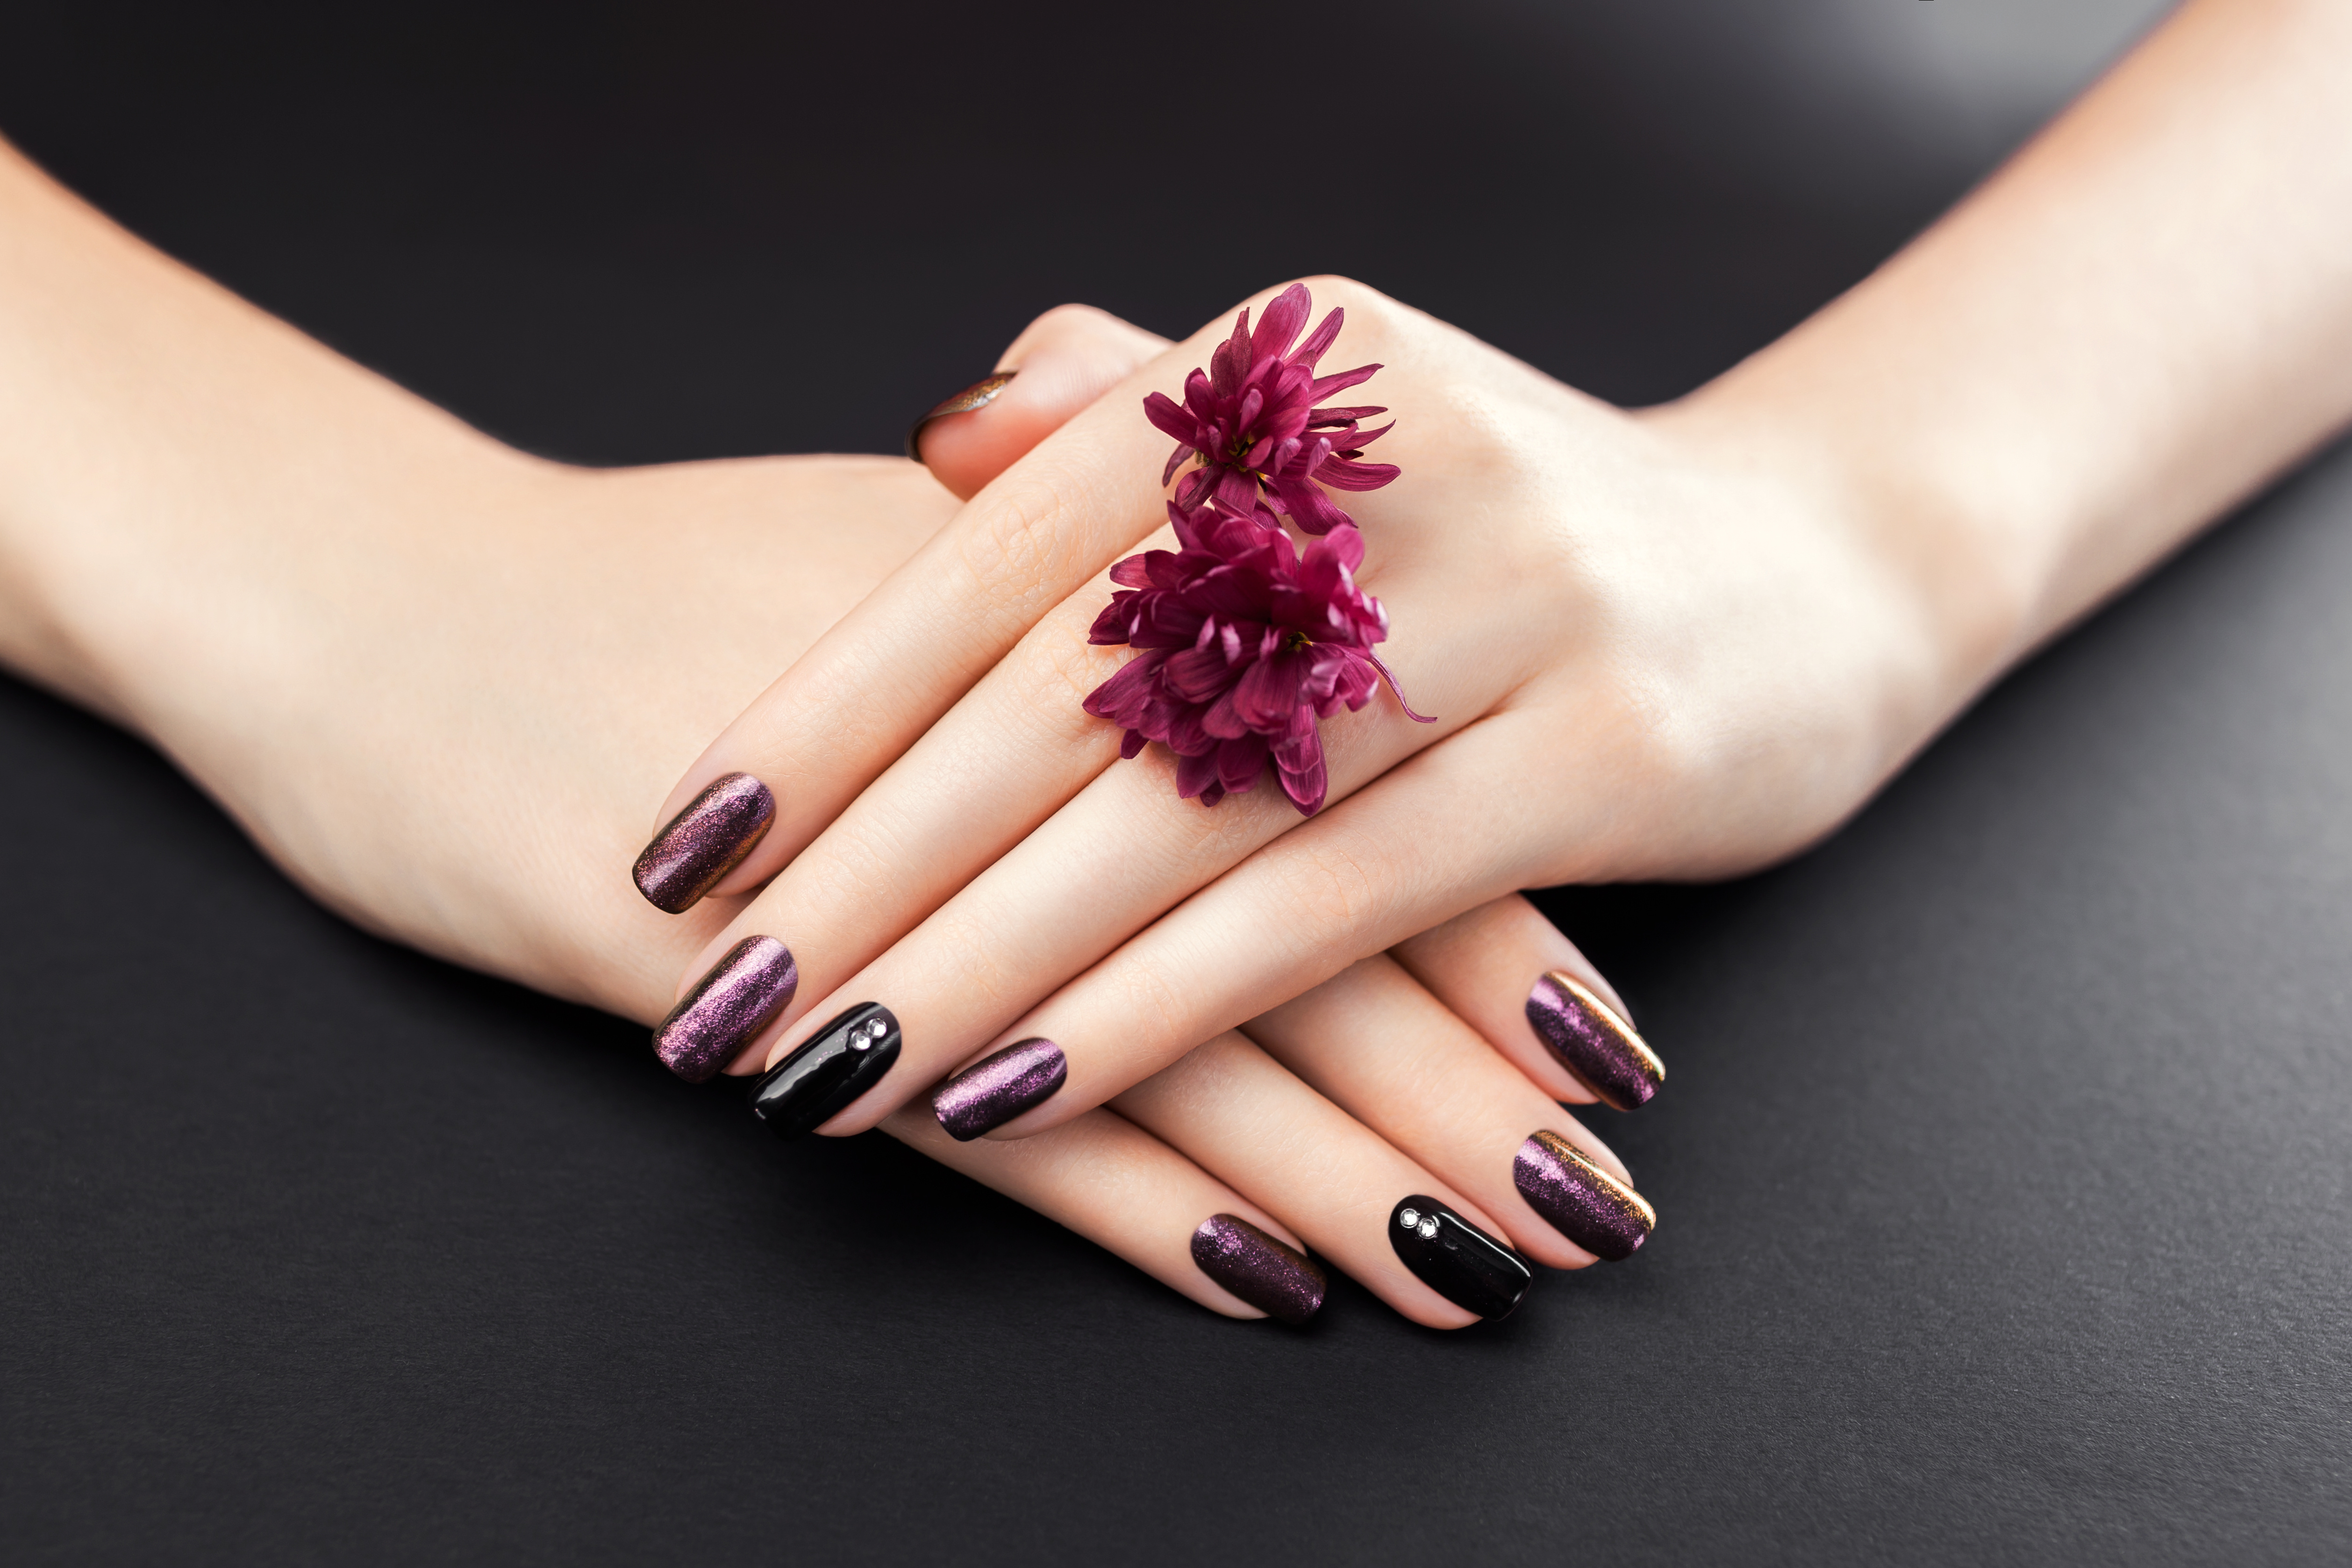 https://0901.nccdn.net/4_2/000/000/011/751/Canva---Black-and-burgundy-manicure-with-flowers-on-black-background.-Gel-nail-polish-with-mirror-powder-pigment-5033x3355.jpg